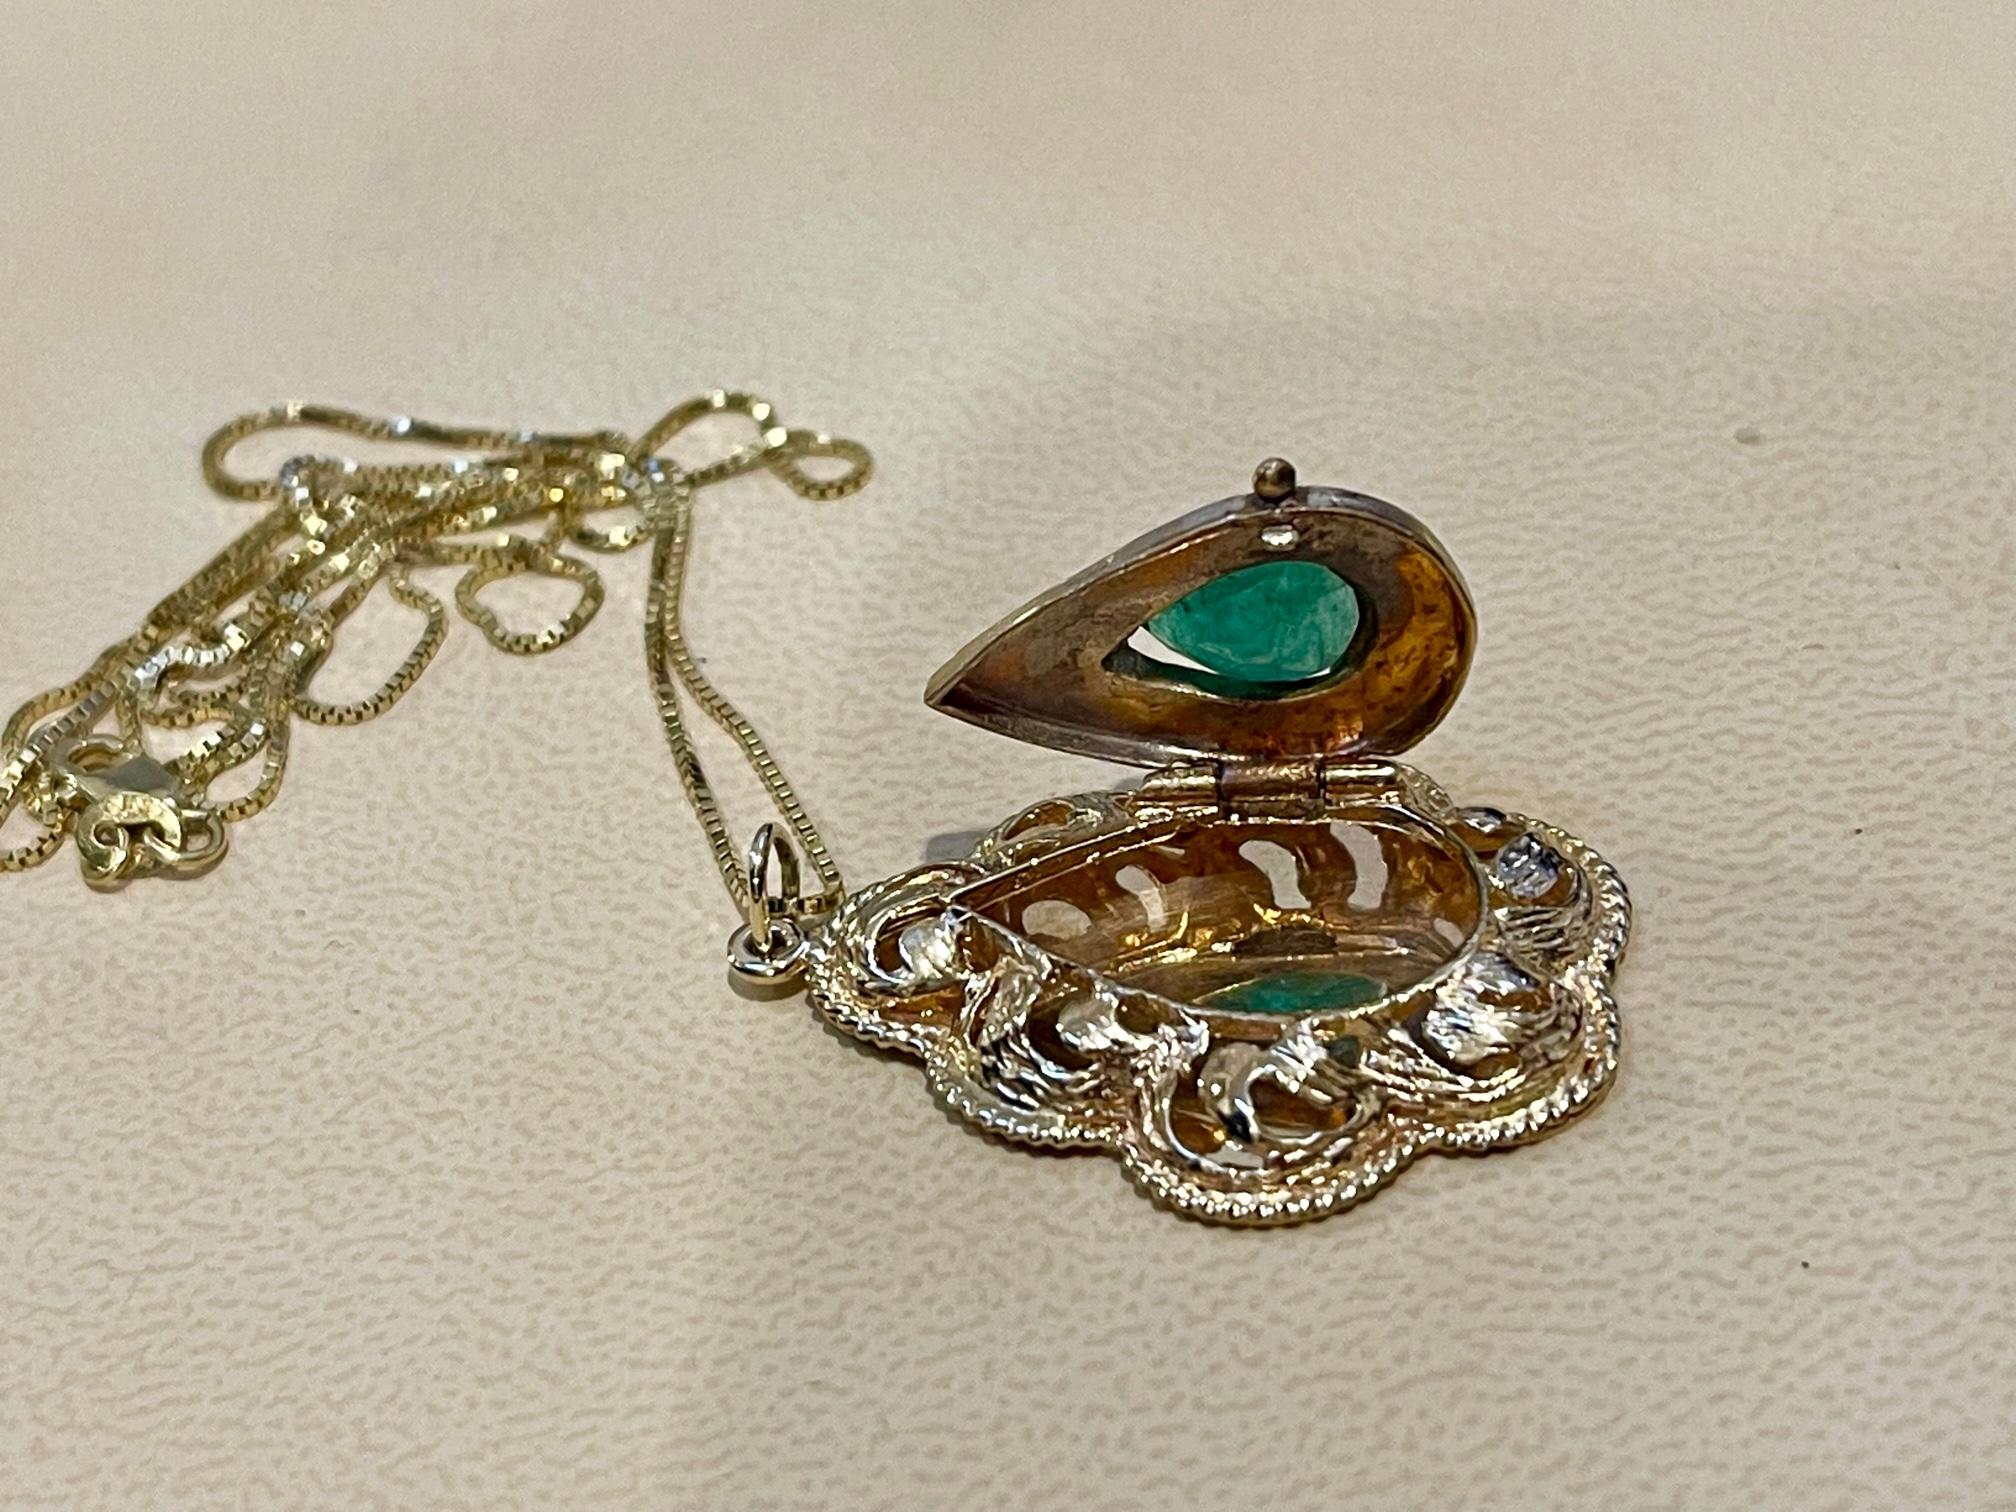 Vintage 14 Karat Yellow Gold 10.5 Gm Chain with Locket and Natural Emerald For Sale 8